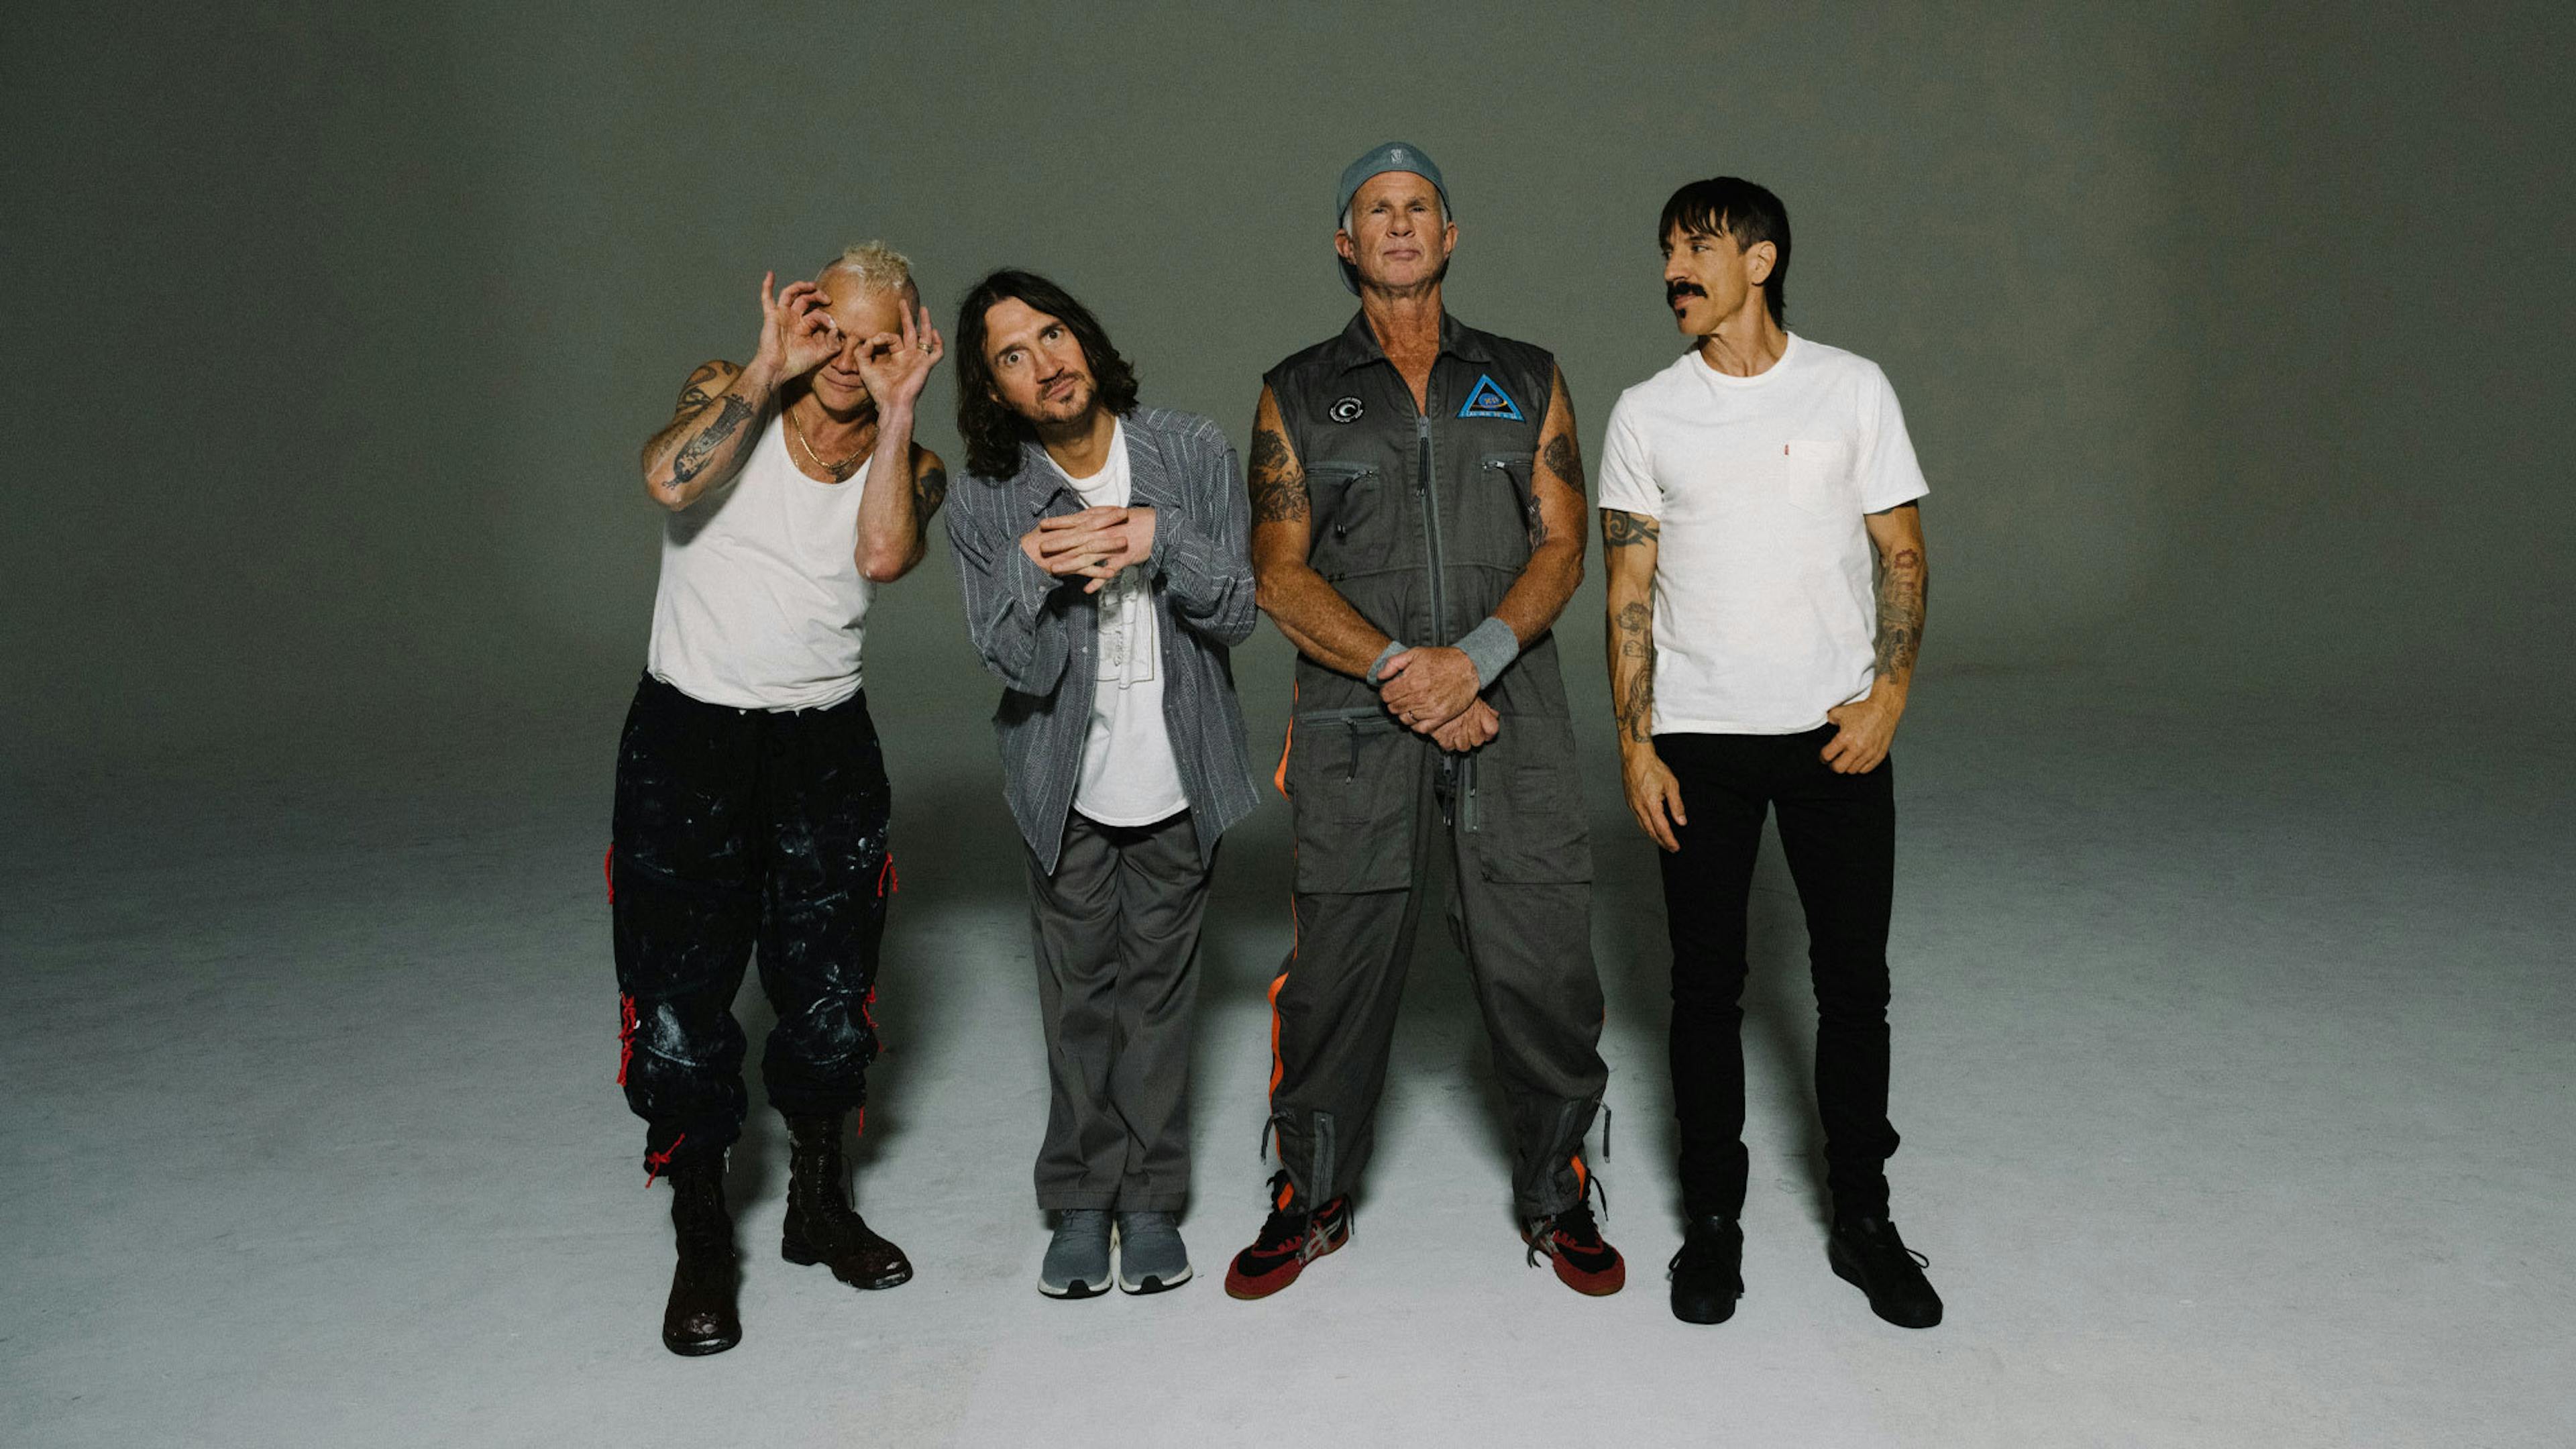 Red Hot Chili Peppers announce 12th album Unlimited Love, release first single Black Summer